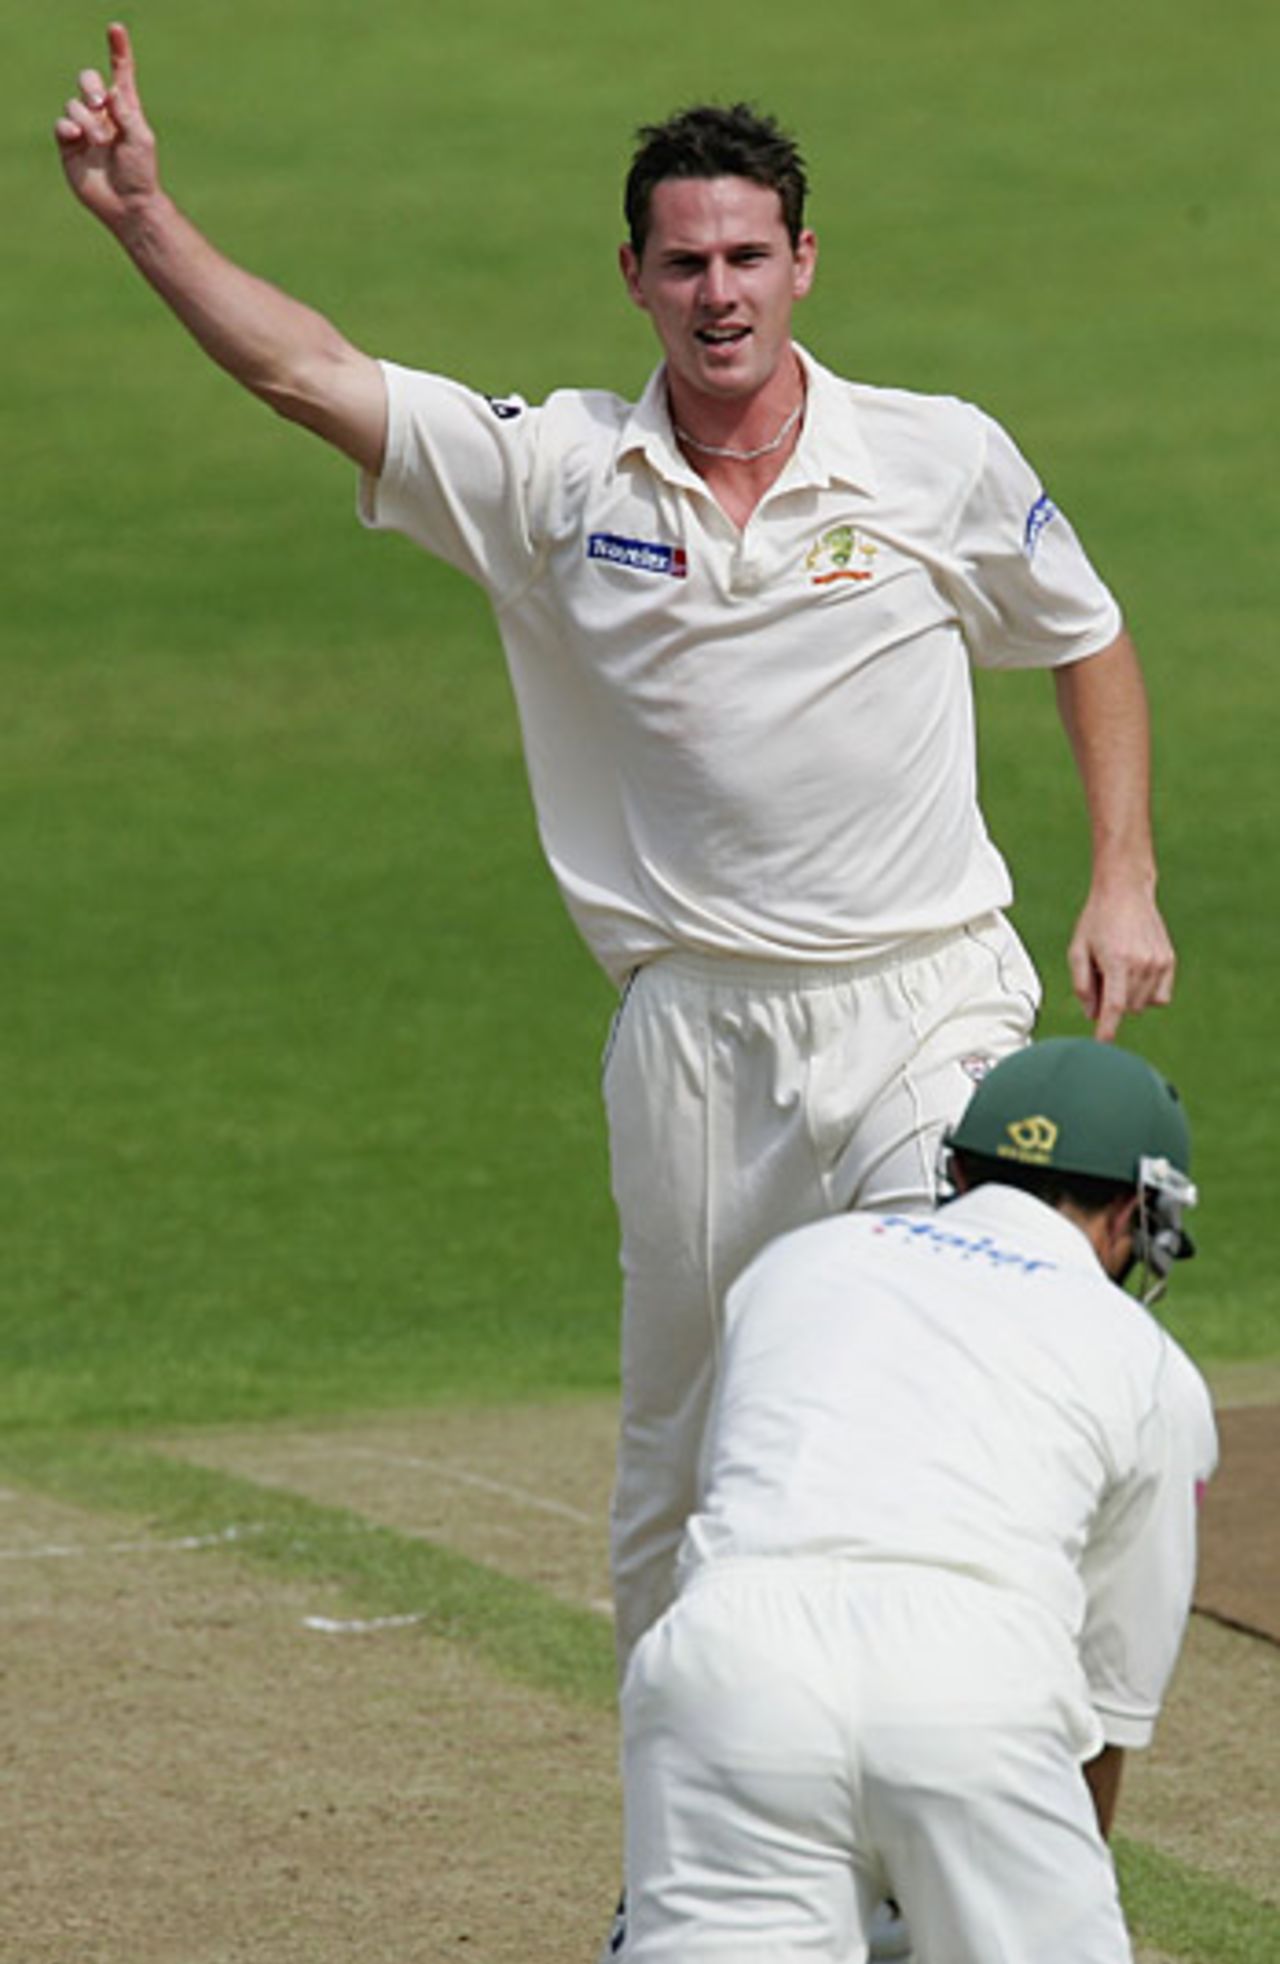 Shaun Tait celebrates the wicket of Stephen Peters, Worcestershire v Australia, Worcester, August 1, 2005